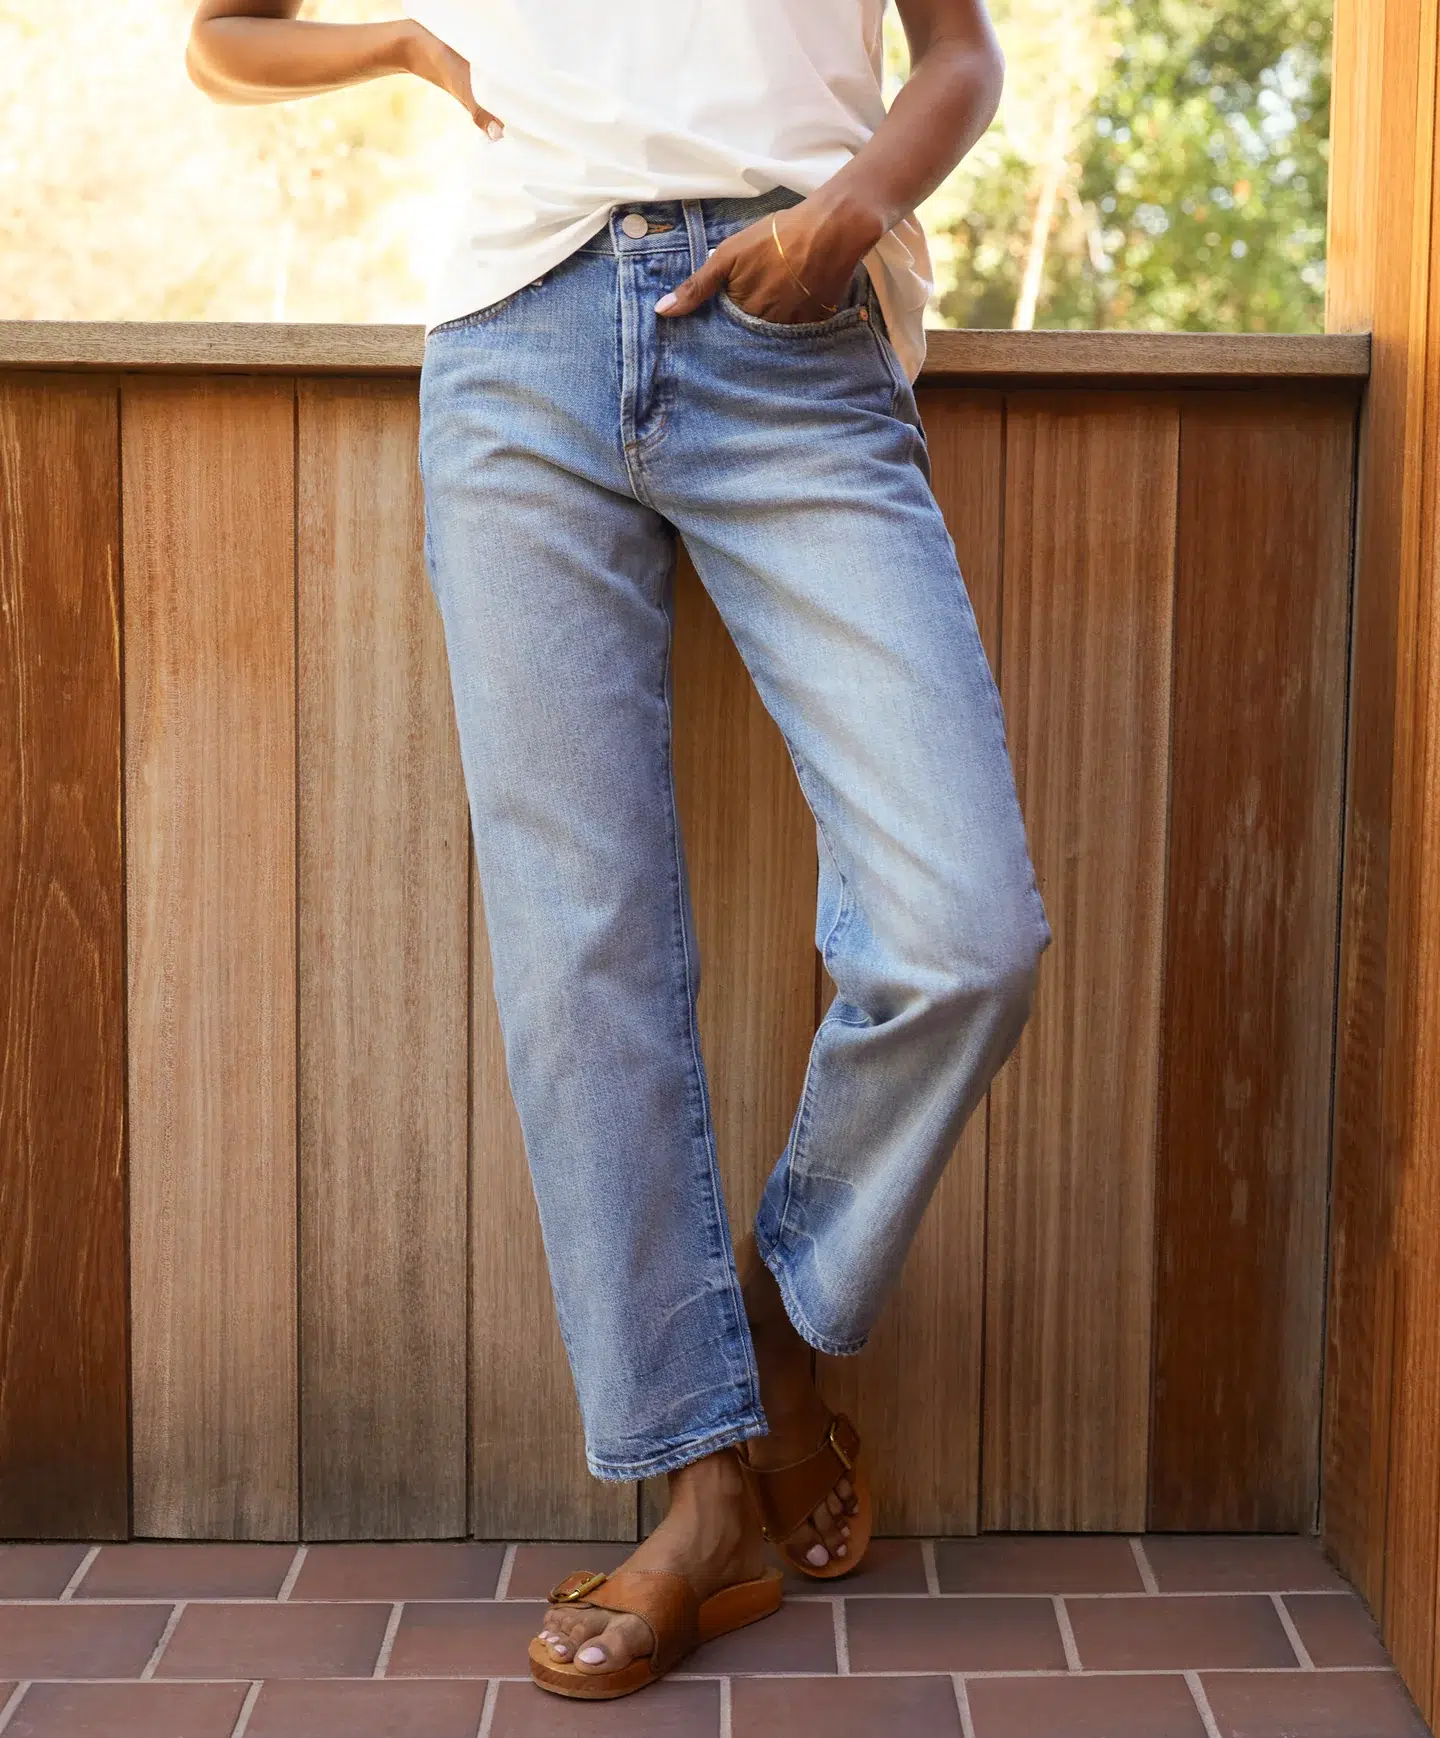 10 American Made Denim Brands For High Quality Jeans - The Good Trade